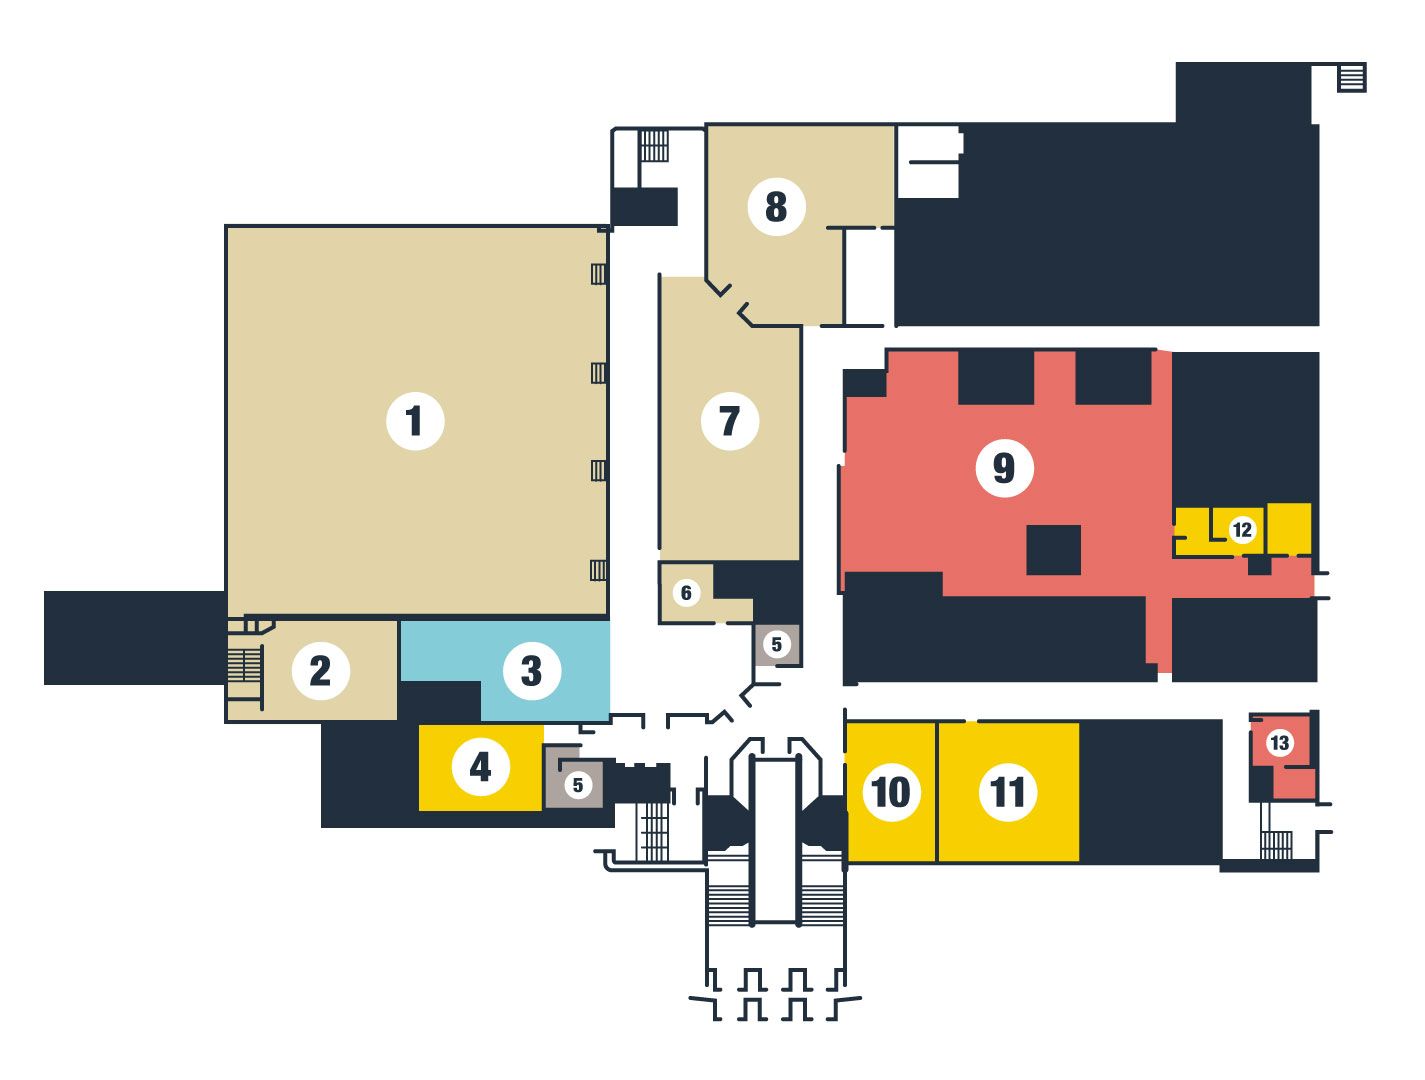 Ground floor plan of the Mountainlair. See content after image for room details.